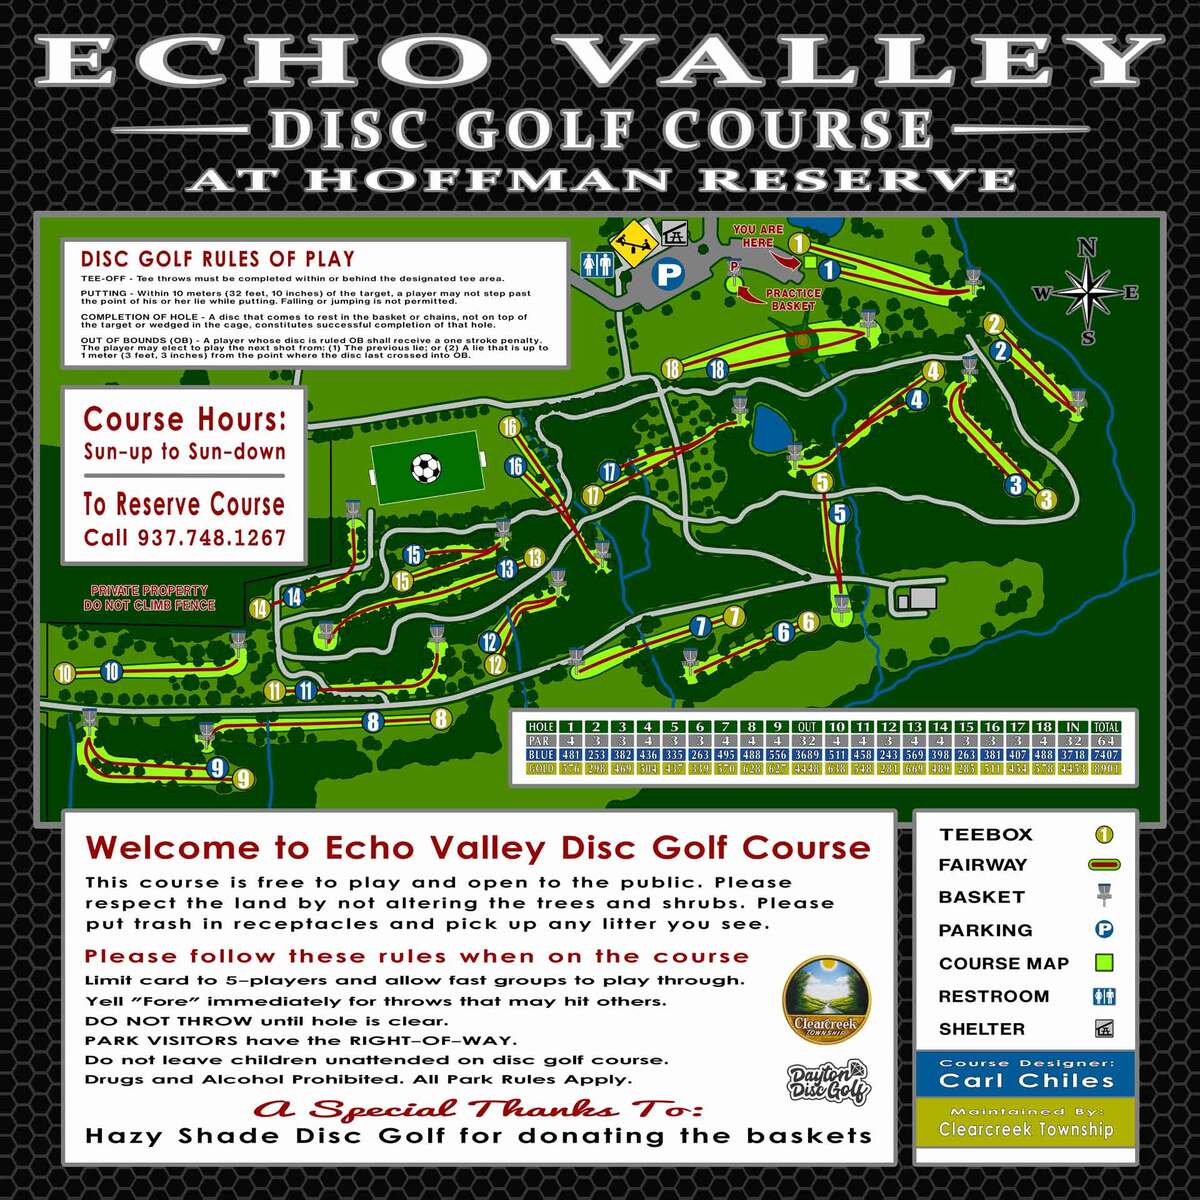 Echo Valley Disc Golf Course Map and information